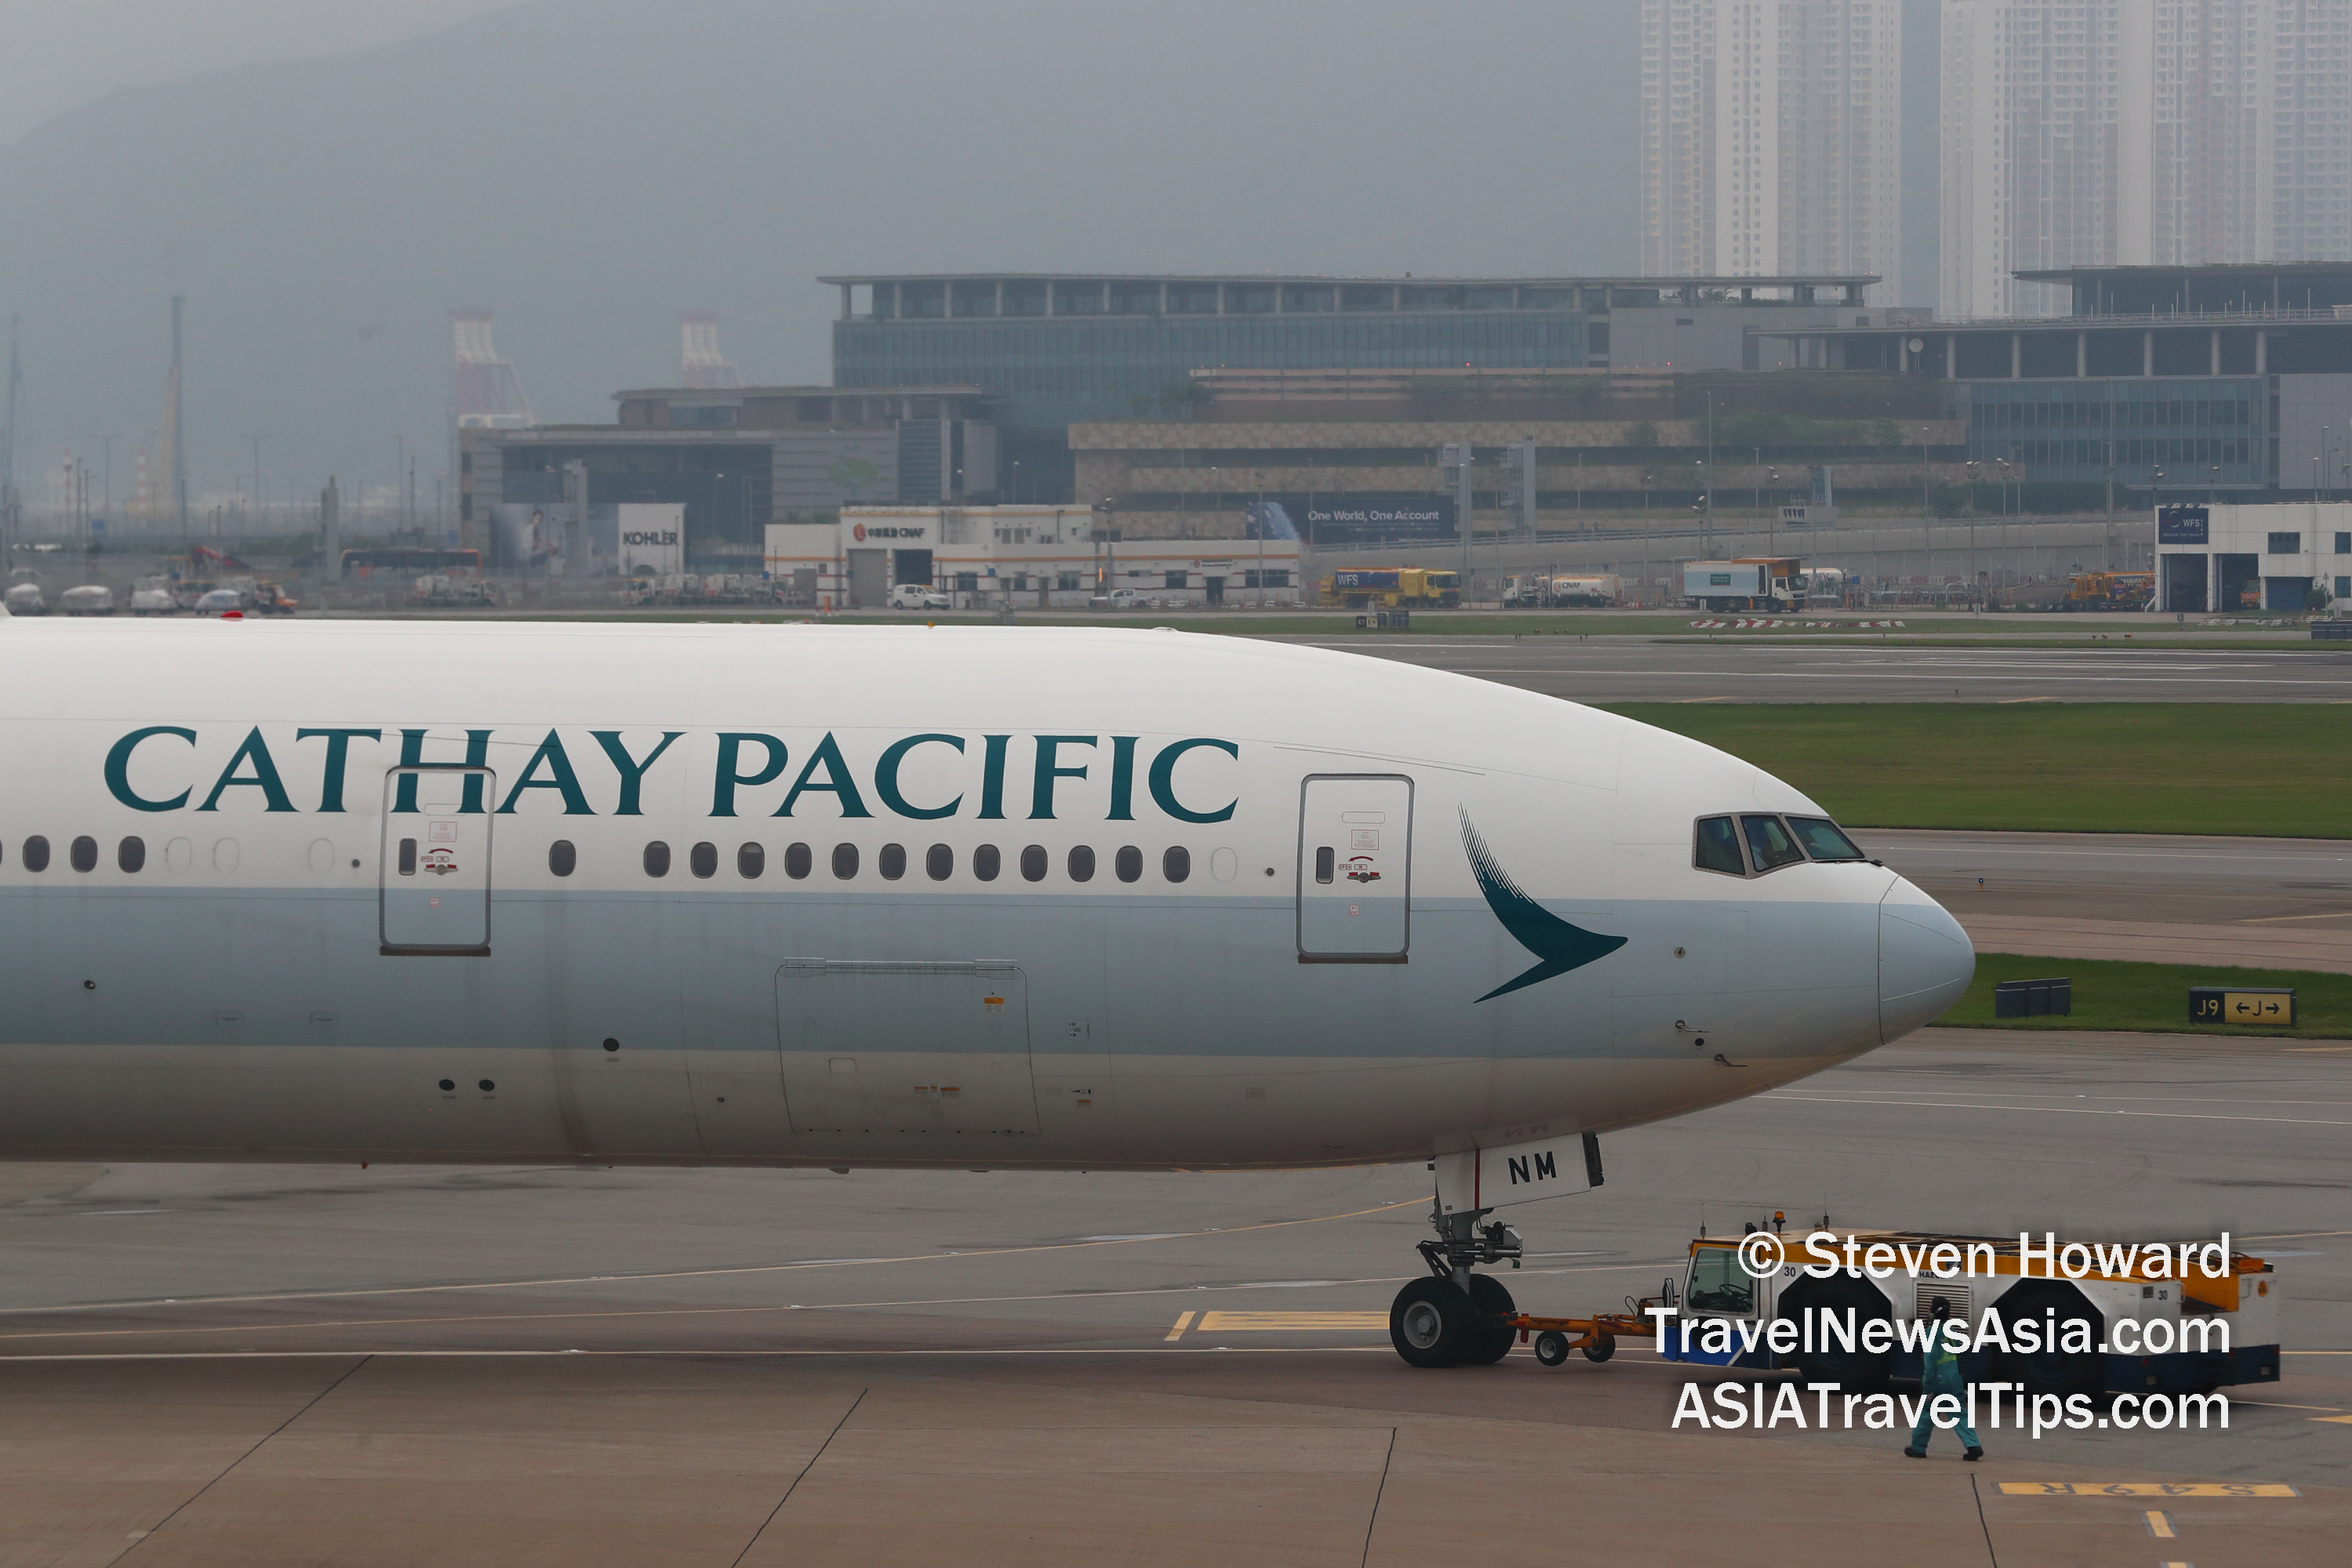 Cathay Pacific Boeing 777-300. Picture by Steven Howard of TravelNewsAsia.com Click to enlarge.